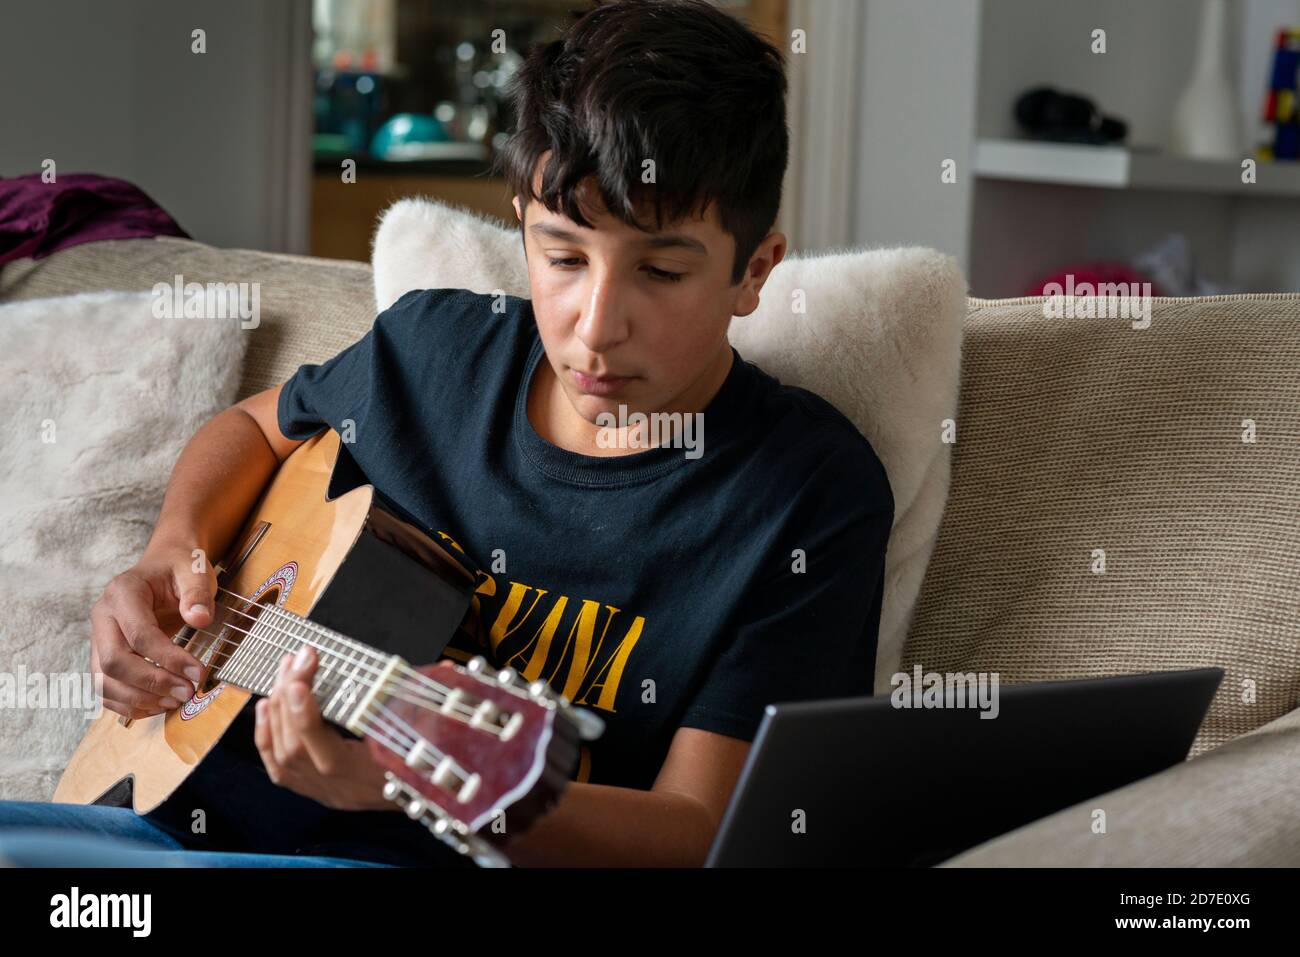 Teenage boy, age 13, playing acoustic guitar- selective focus Stock Photo